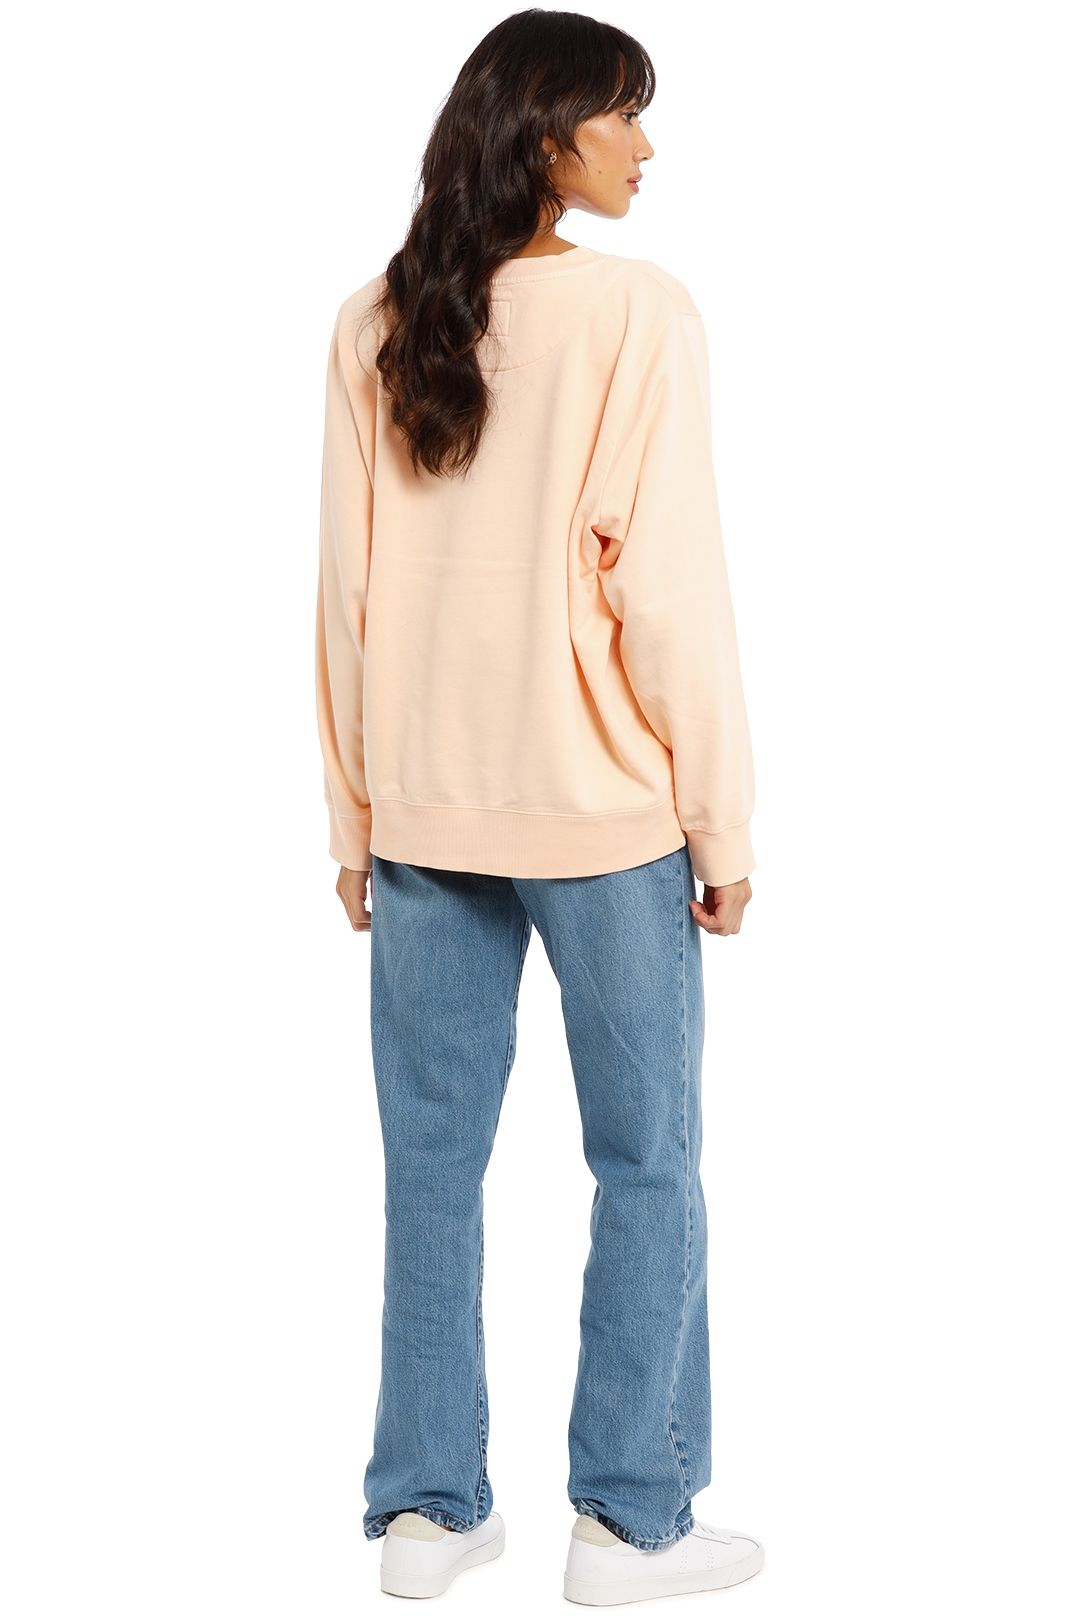 Country Road Heritage Sweat Peach Long Sleeves